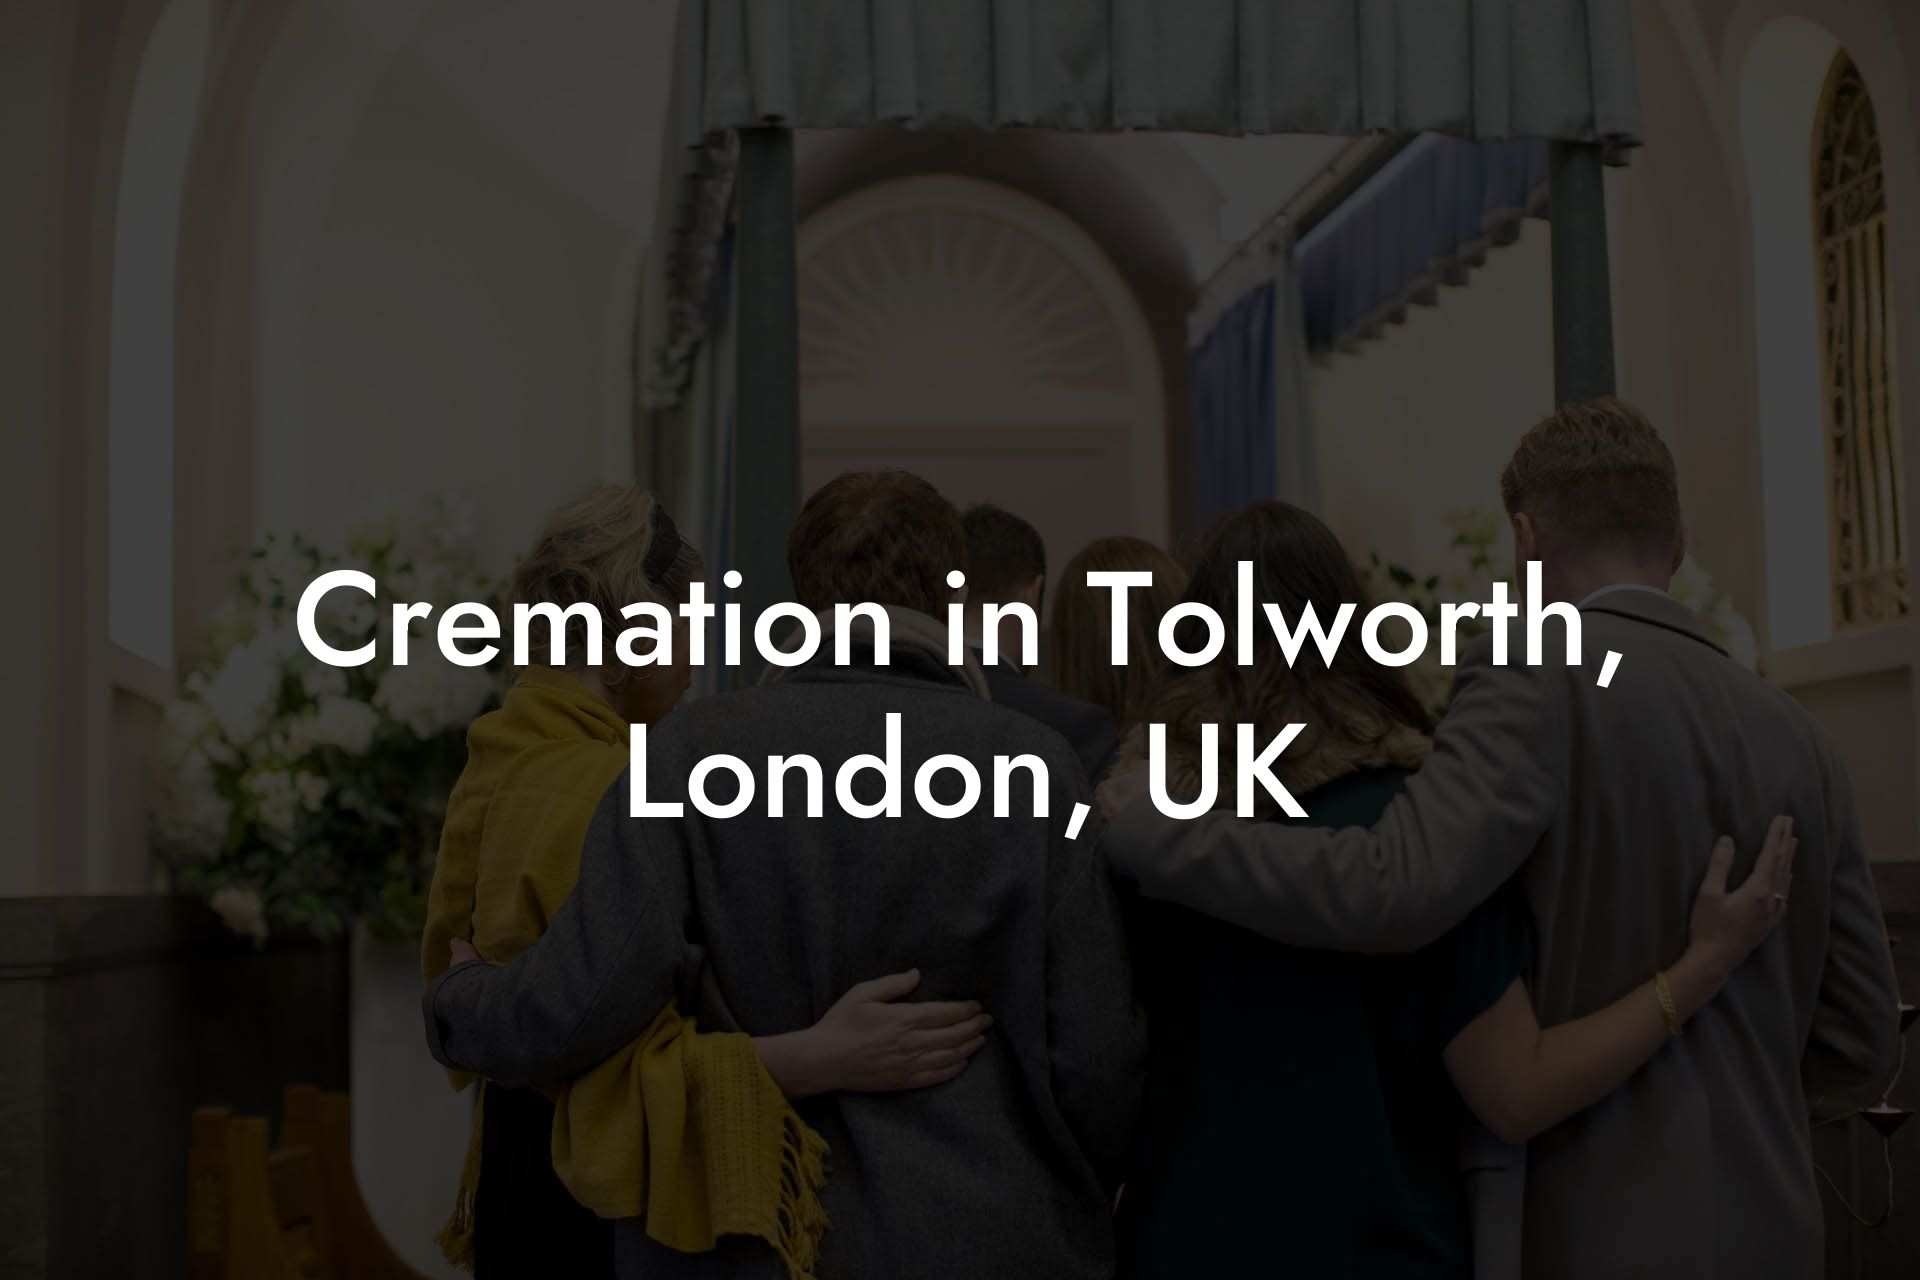 Cremation in Tolworth, London, UK